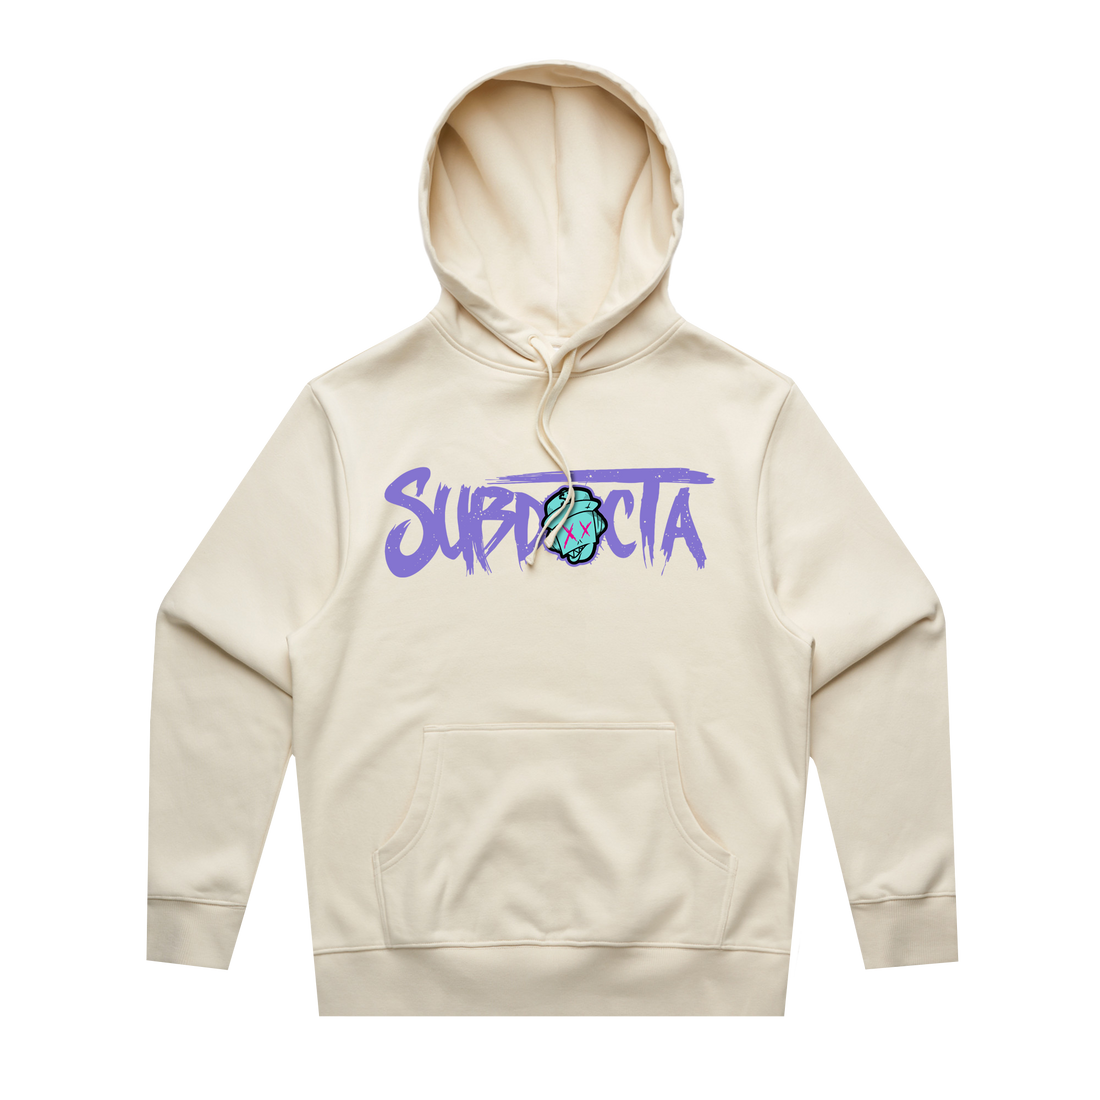 SubDocta - Bass Science - Hoodie